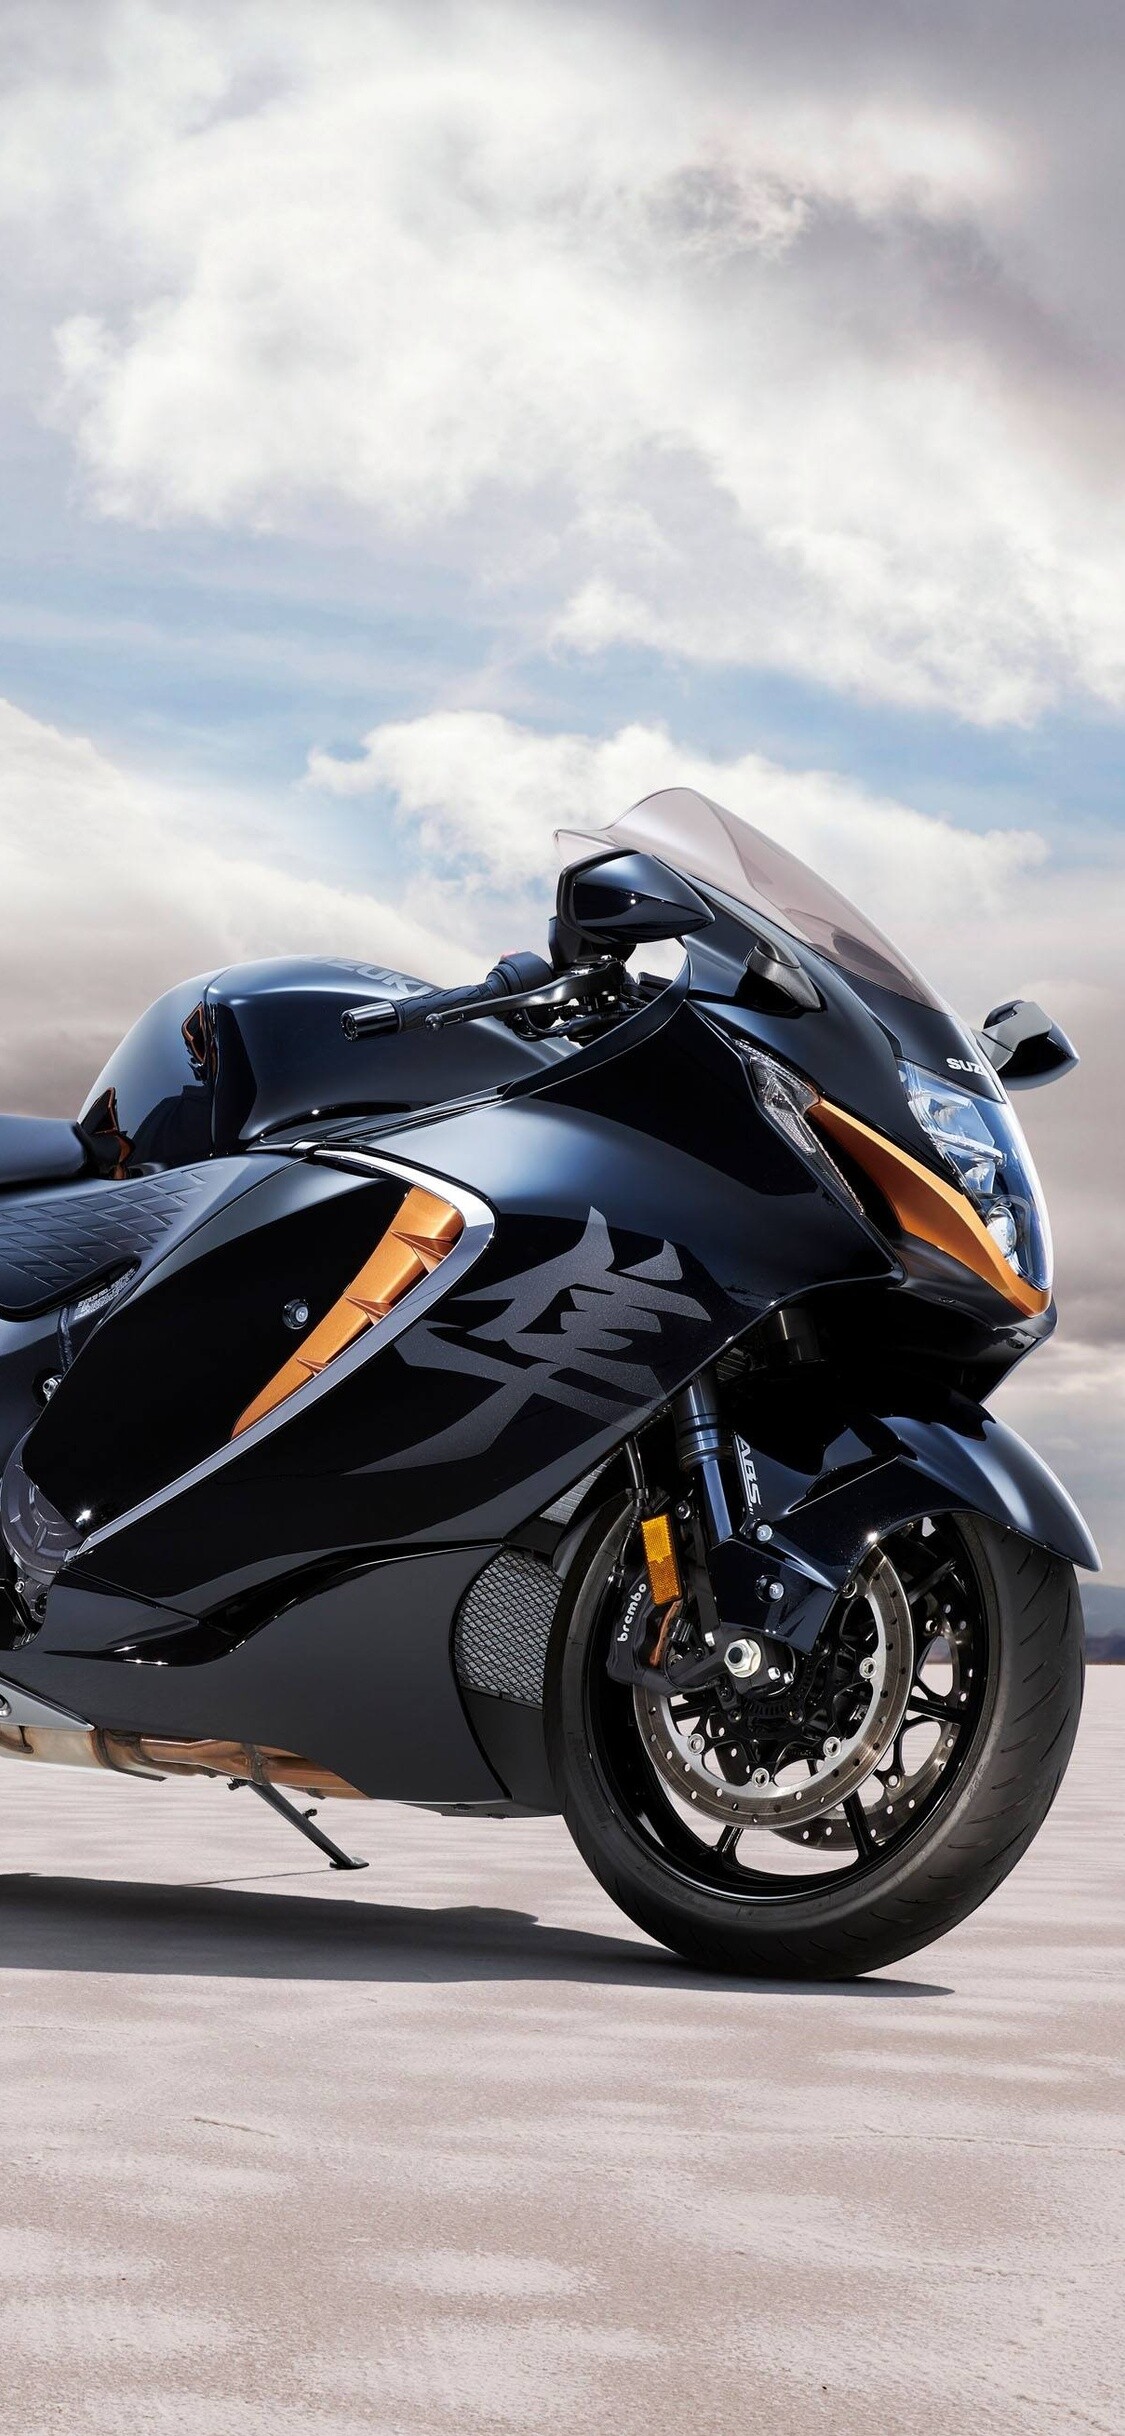 Suzuki Hayabusa: Motorcycle, Powered by a 1340 cc bs6 engine, Debuted in 1999. 1130x2440 HD Background.